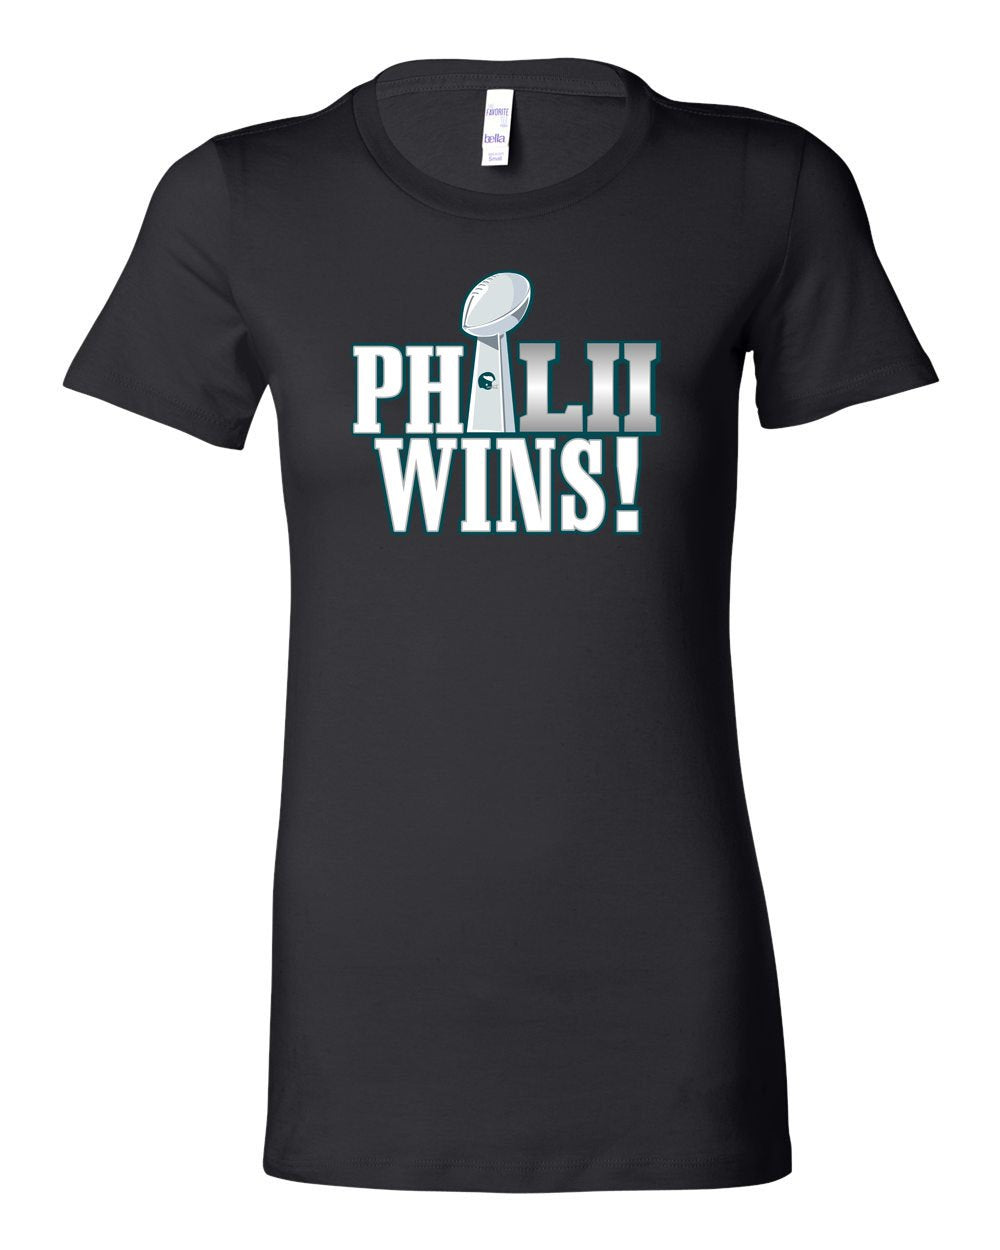 Philly Wins! LADIES Junior-Fit T-Shirt